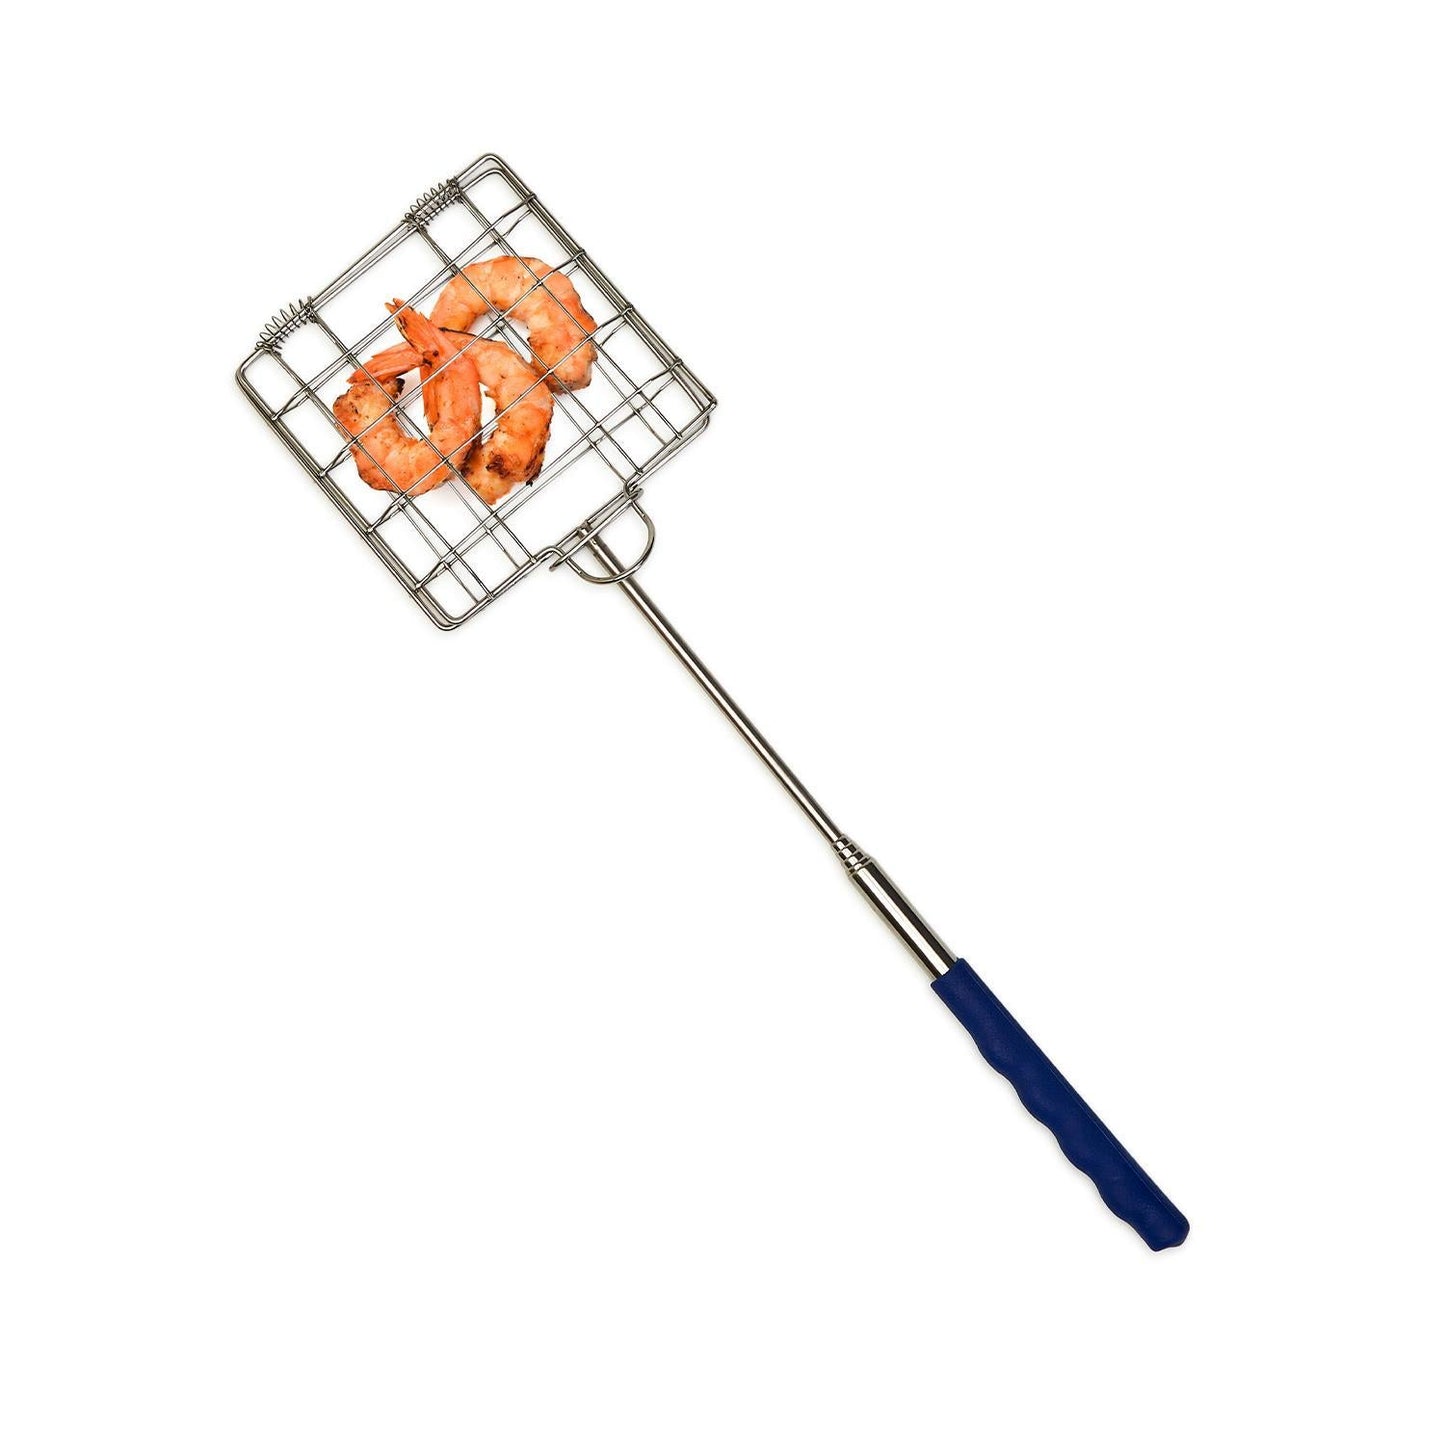 Extendable Grilling Tool